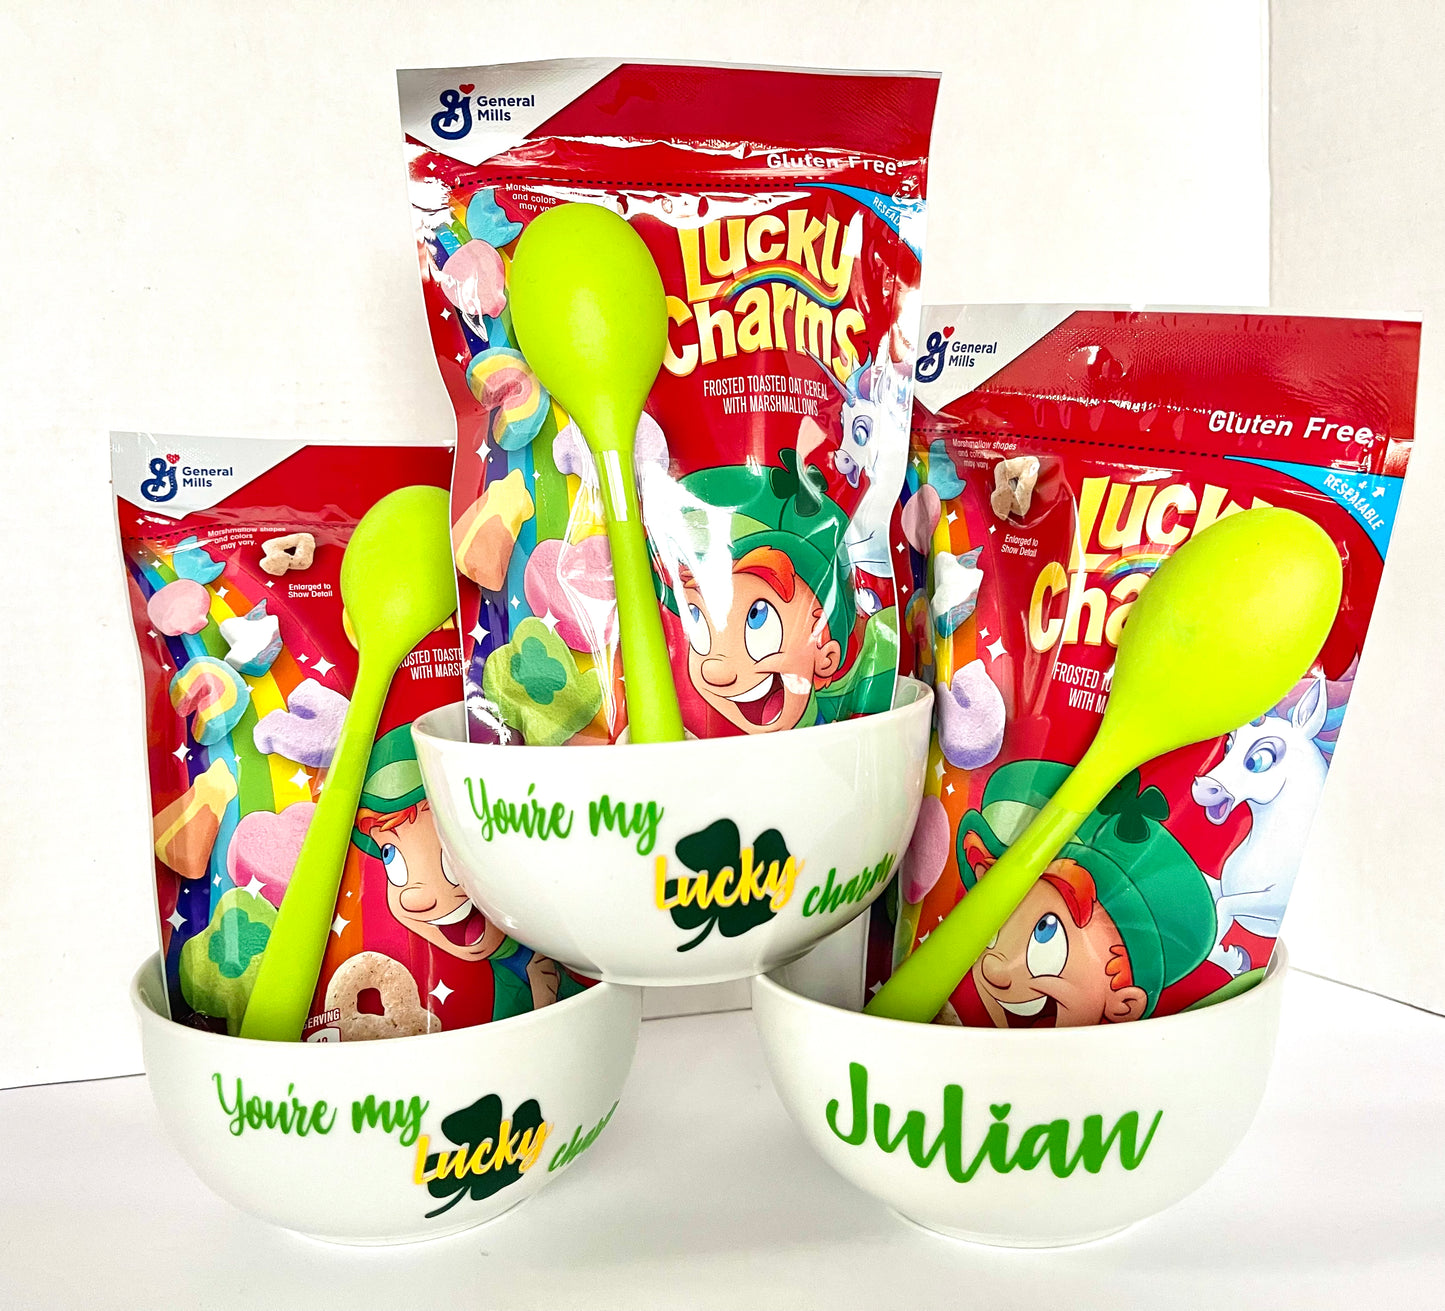 Saint Patrick's Day Themed Cereal Bowl